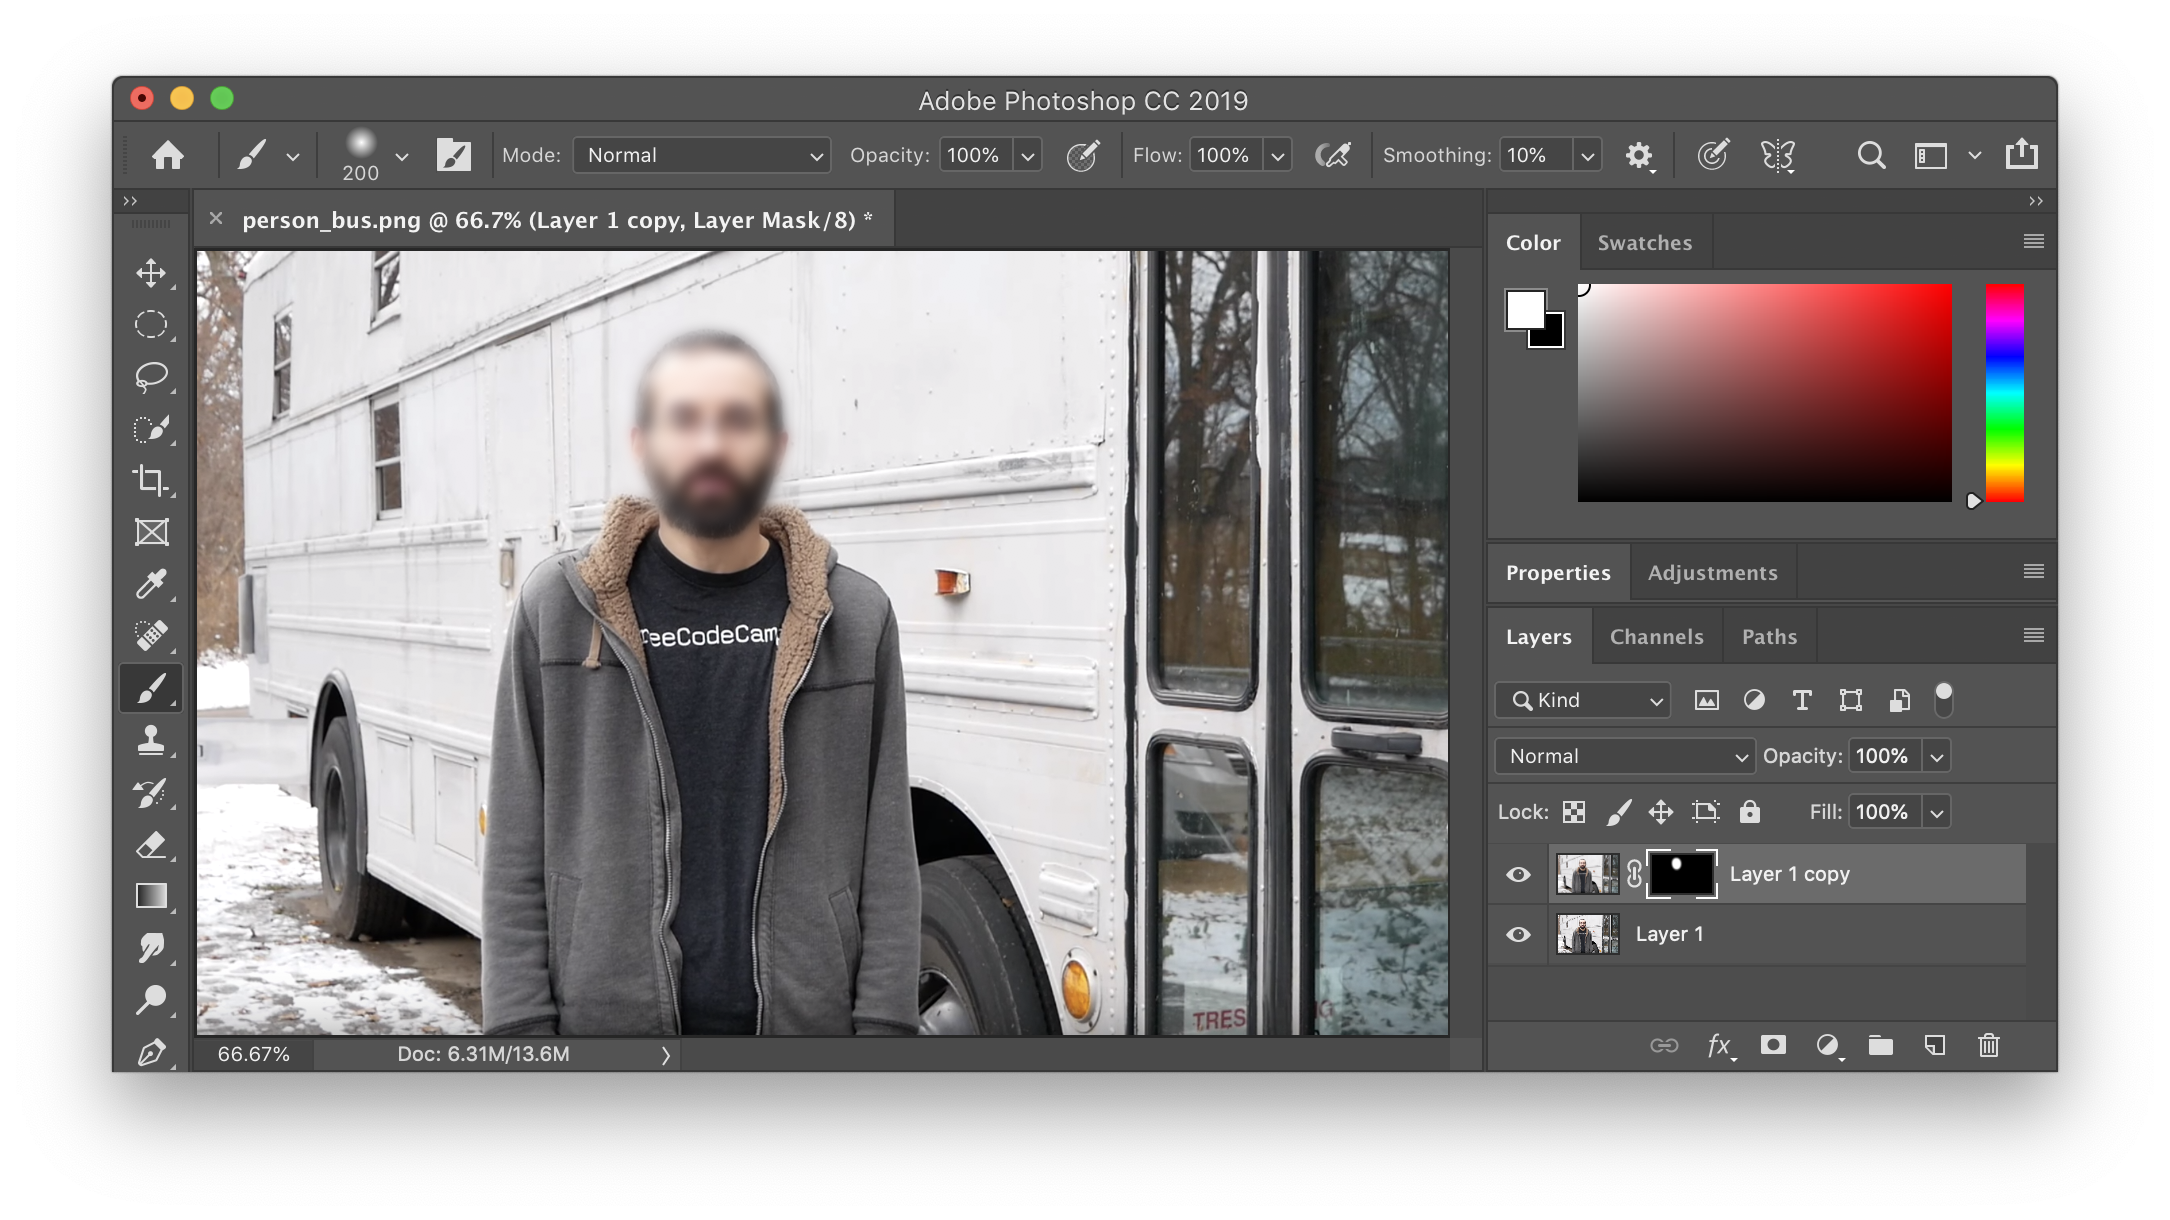 How to Blur a Picture in Photoshop - Blur Faces, Backgrounds, and More